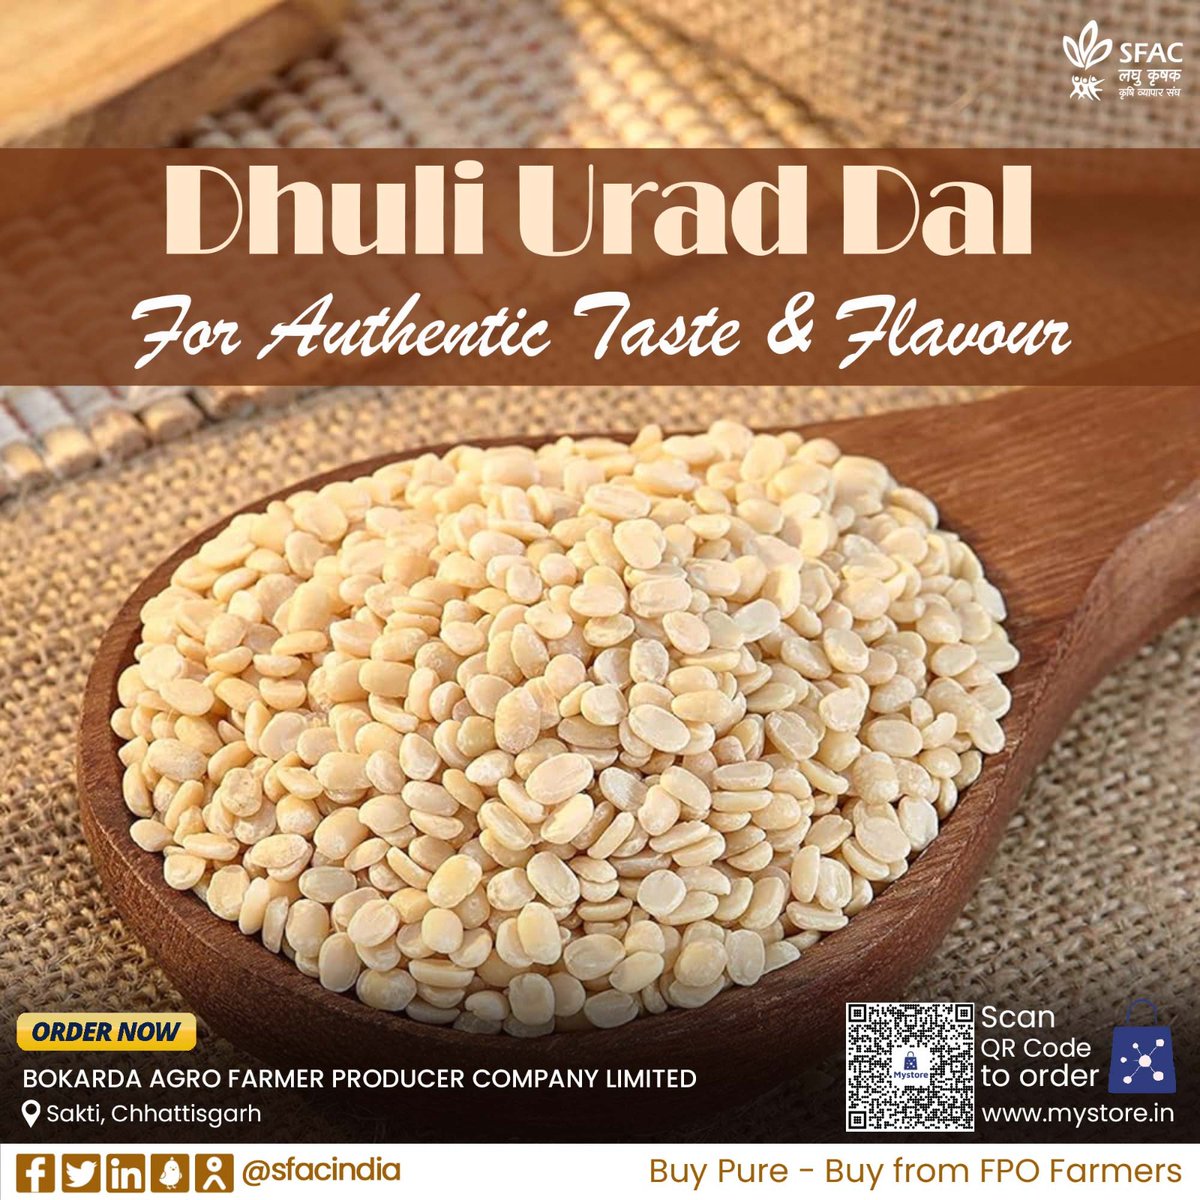 This safely cleaned, unpolished, organic urad dal provides savoury taste & flavour with numerous health benefits.

Buy straight from FPO farmers at👇

mystore.in/en/product/ura…

🍲

#VocalForLocal #healthychoices #healthyeating #healthyhabits #tastyrecipes